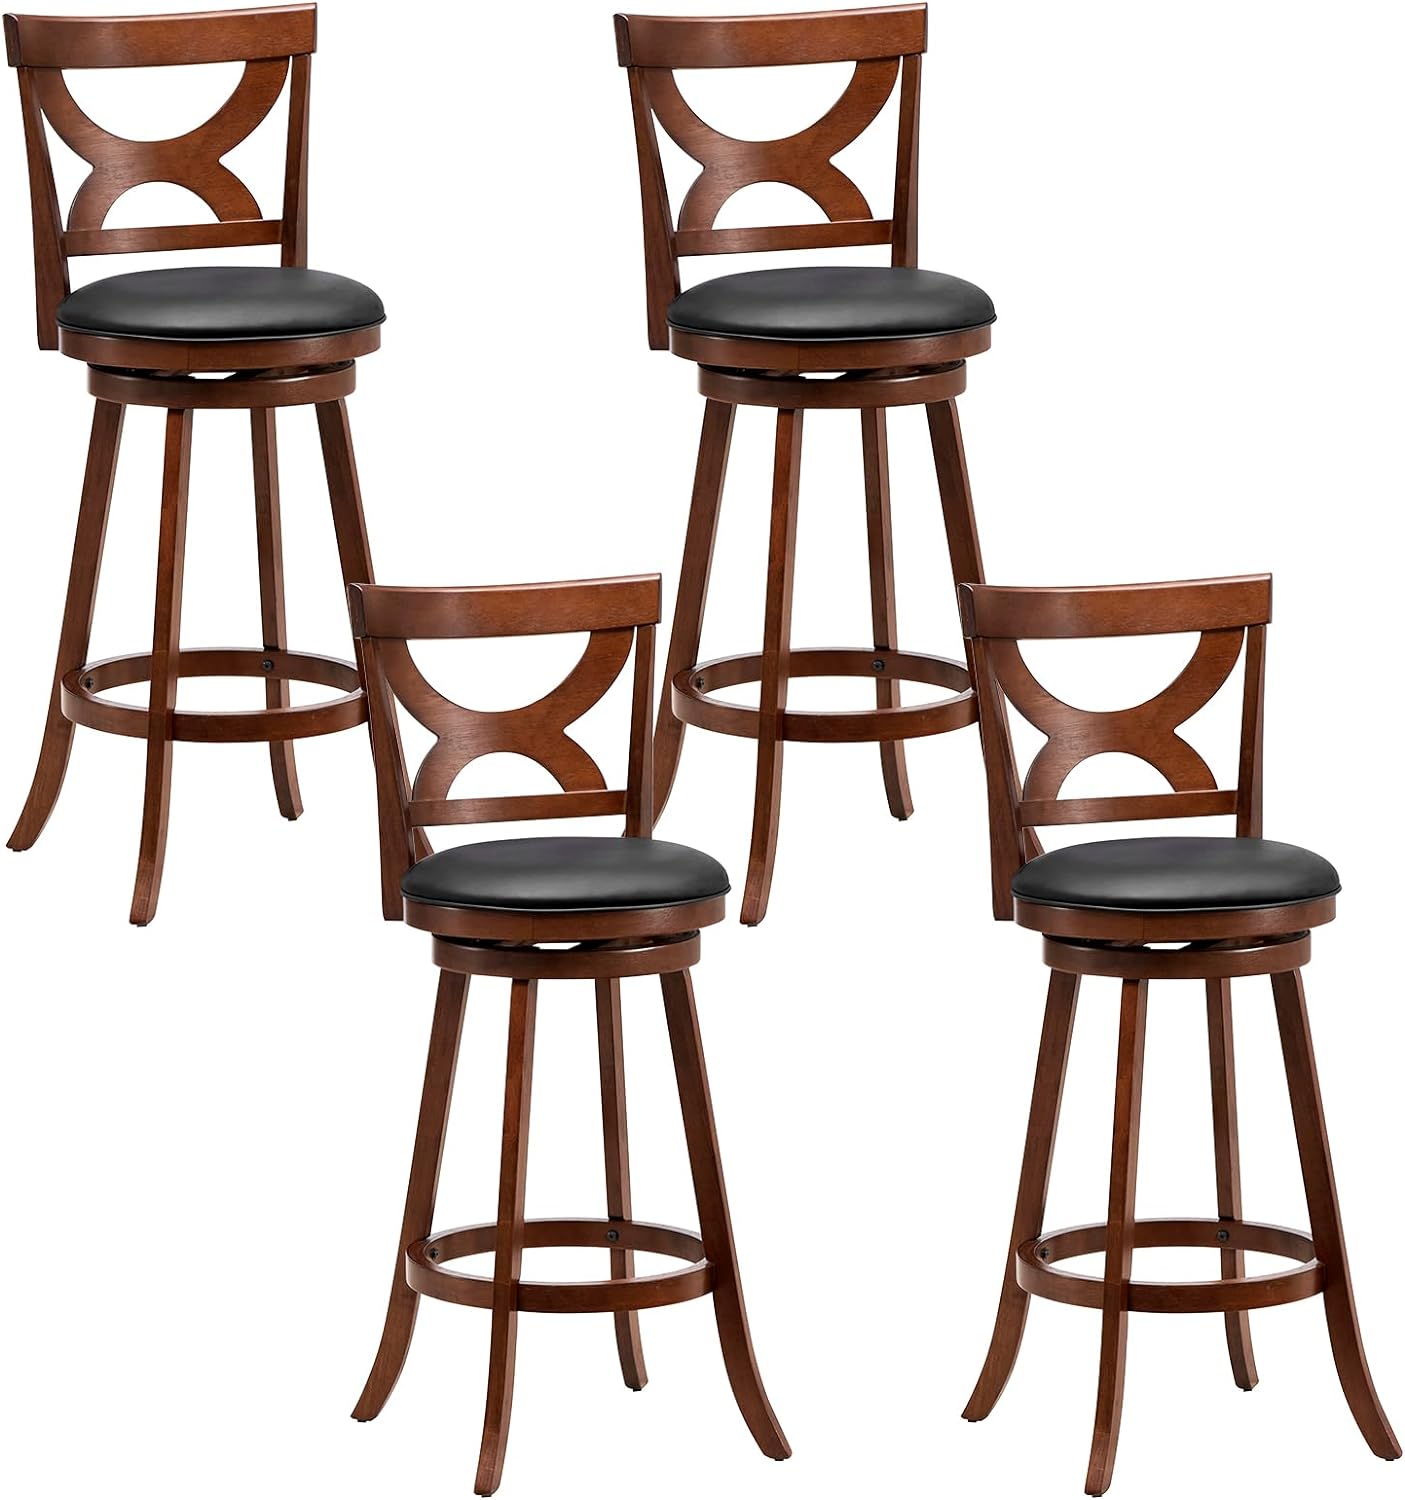 Giantex Bar Stools Set of 2, 30.5" Counter Height Bar Dining Chairs with Back & Footrest, Rubber Wood Frame